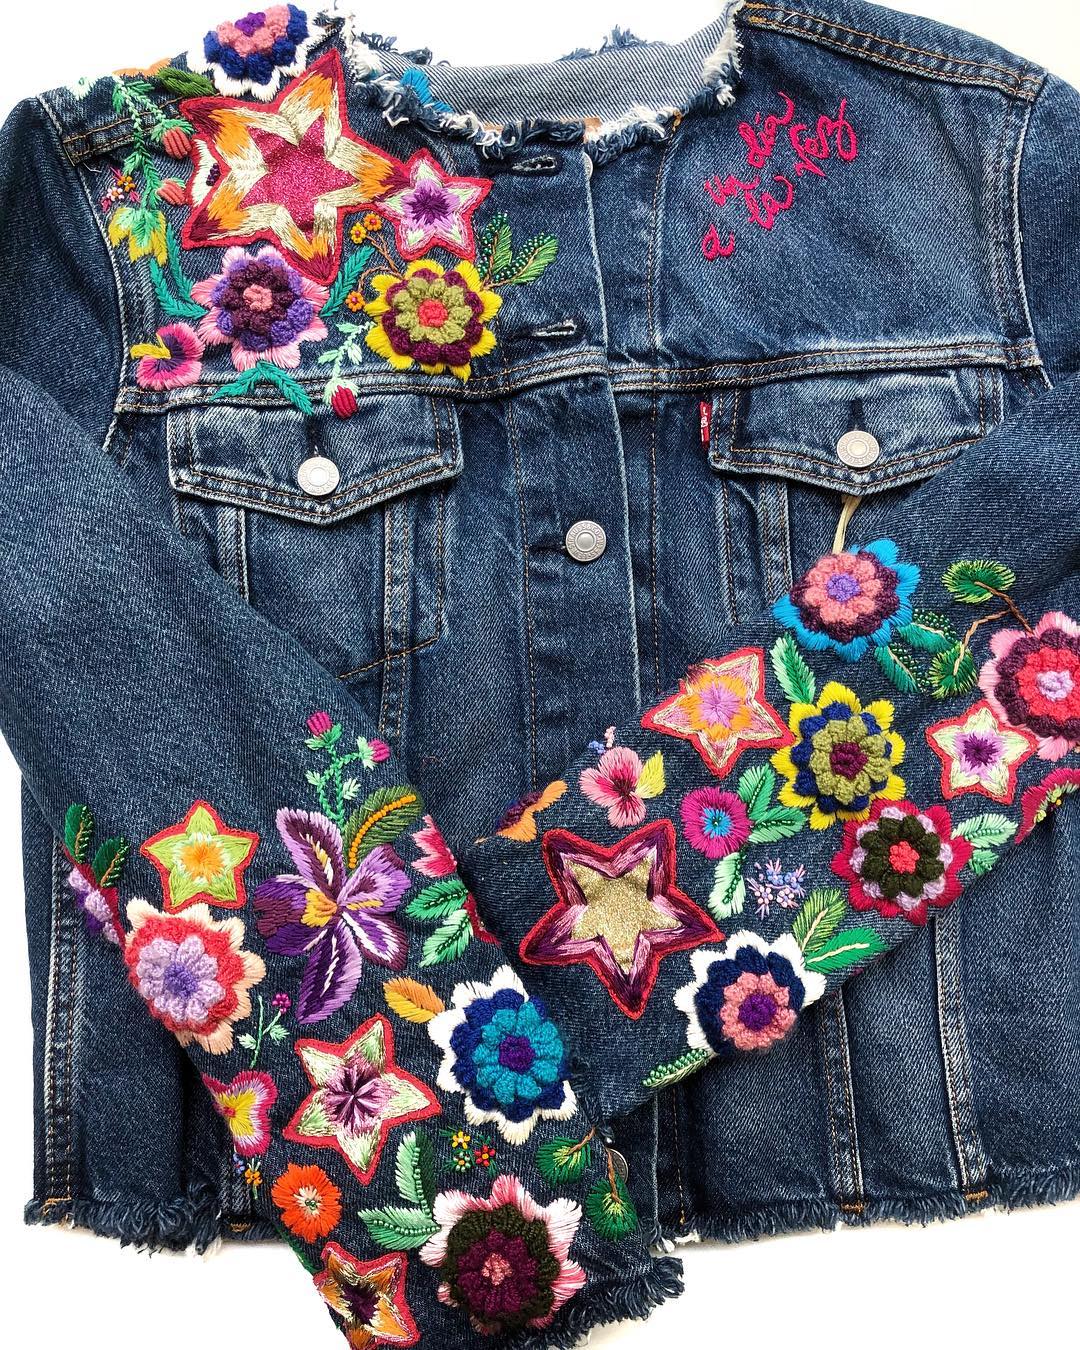 Sale > denim jacket embroidery designs > in stock